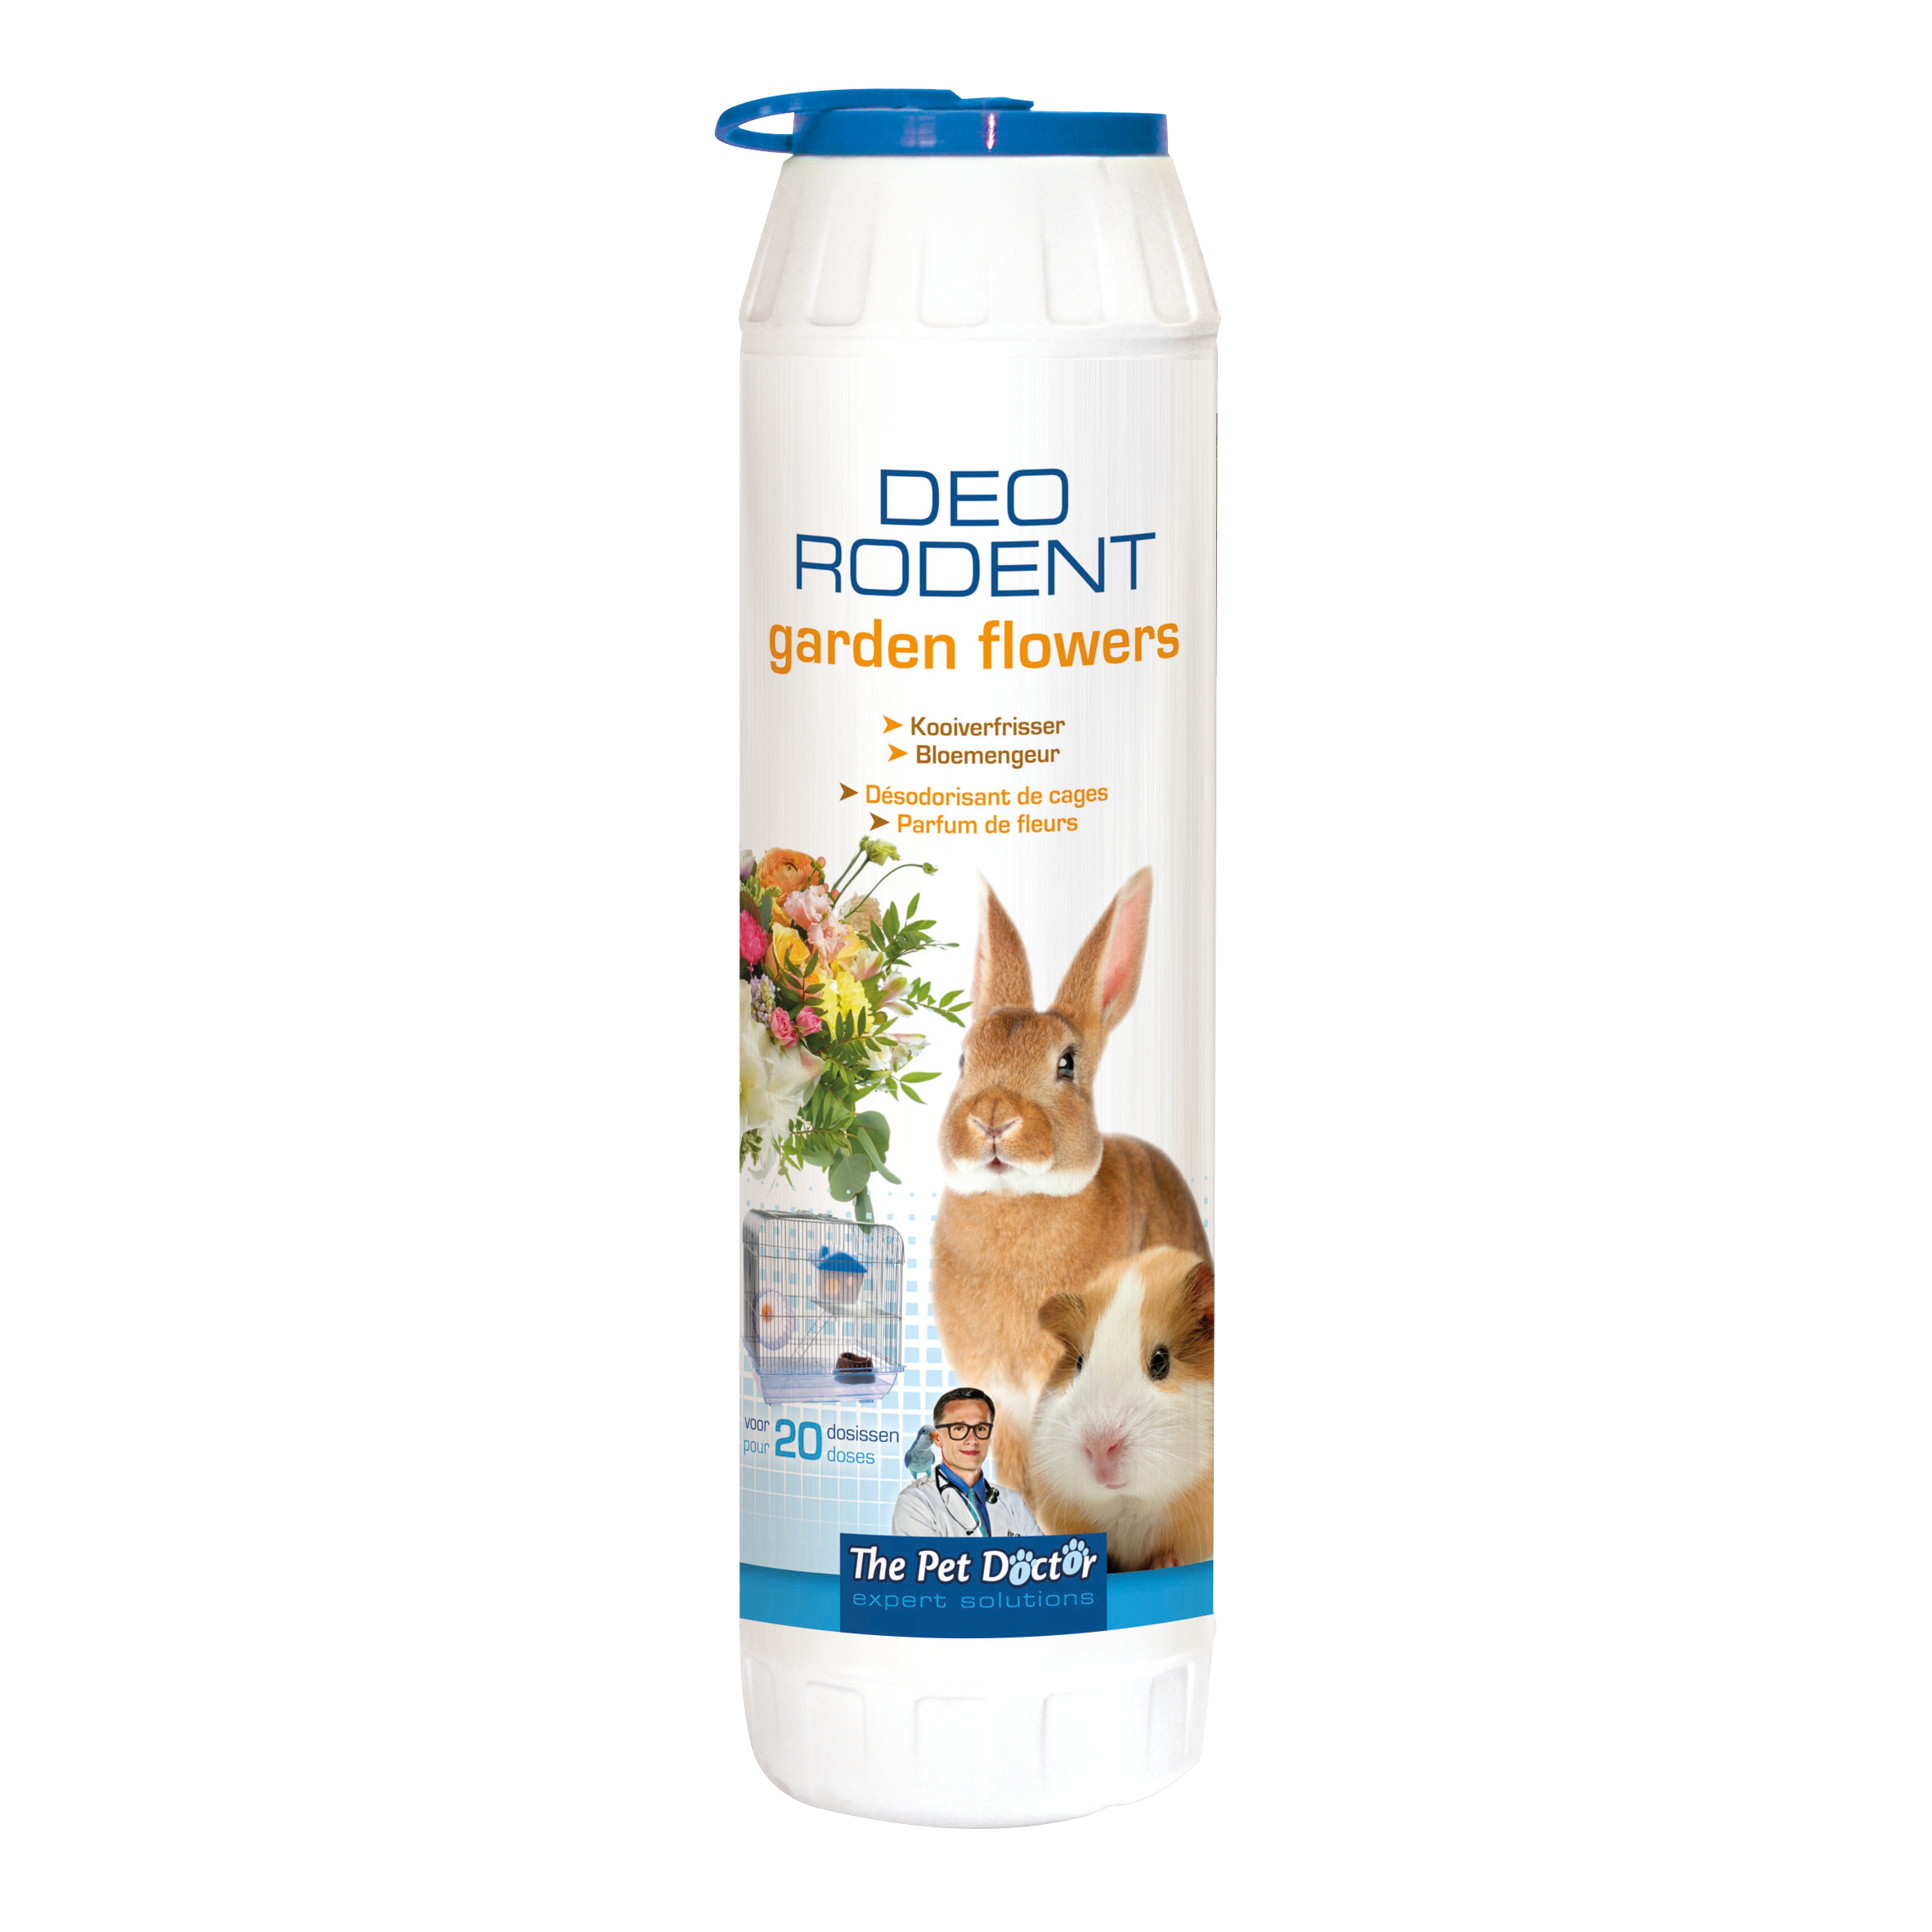 The Pet Doctor Deo Rodent Garden Flowers 750 g image